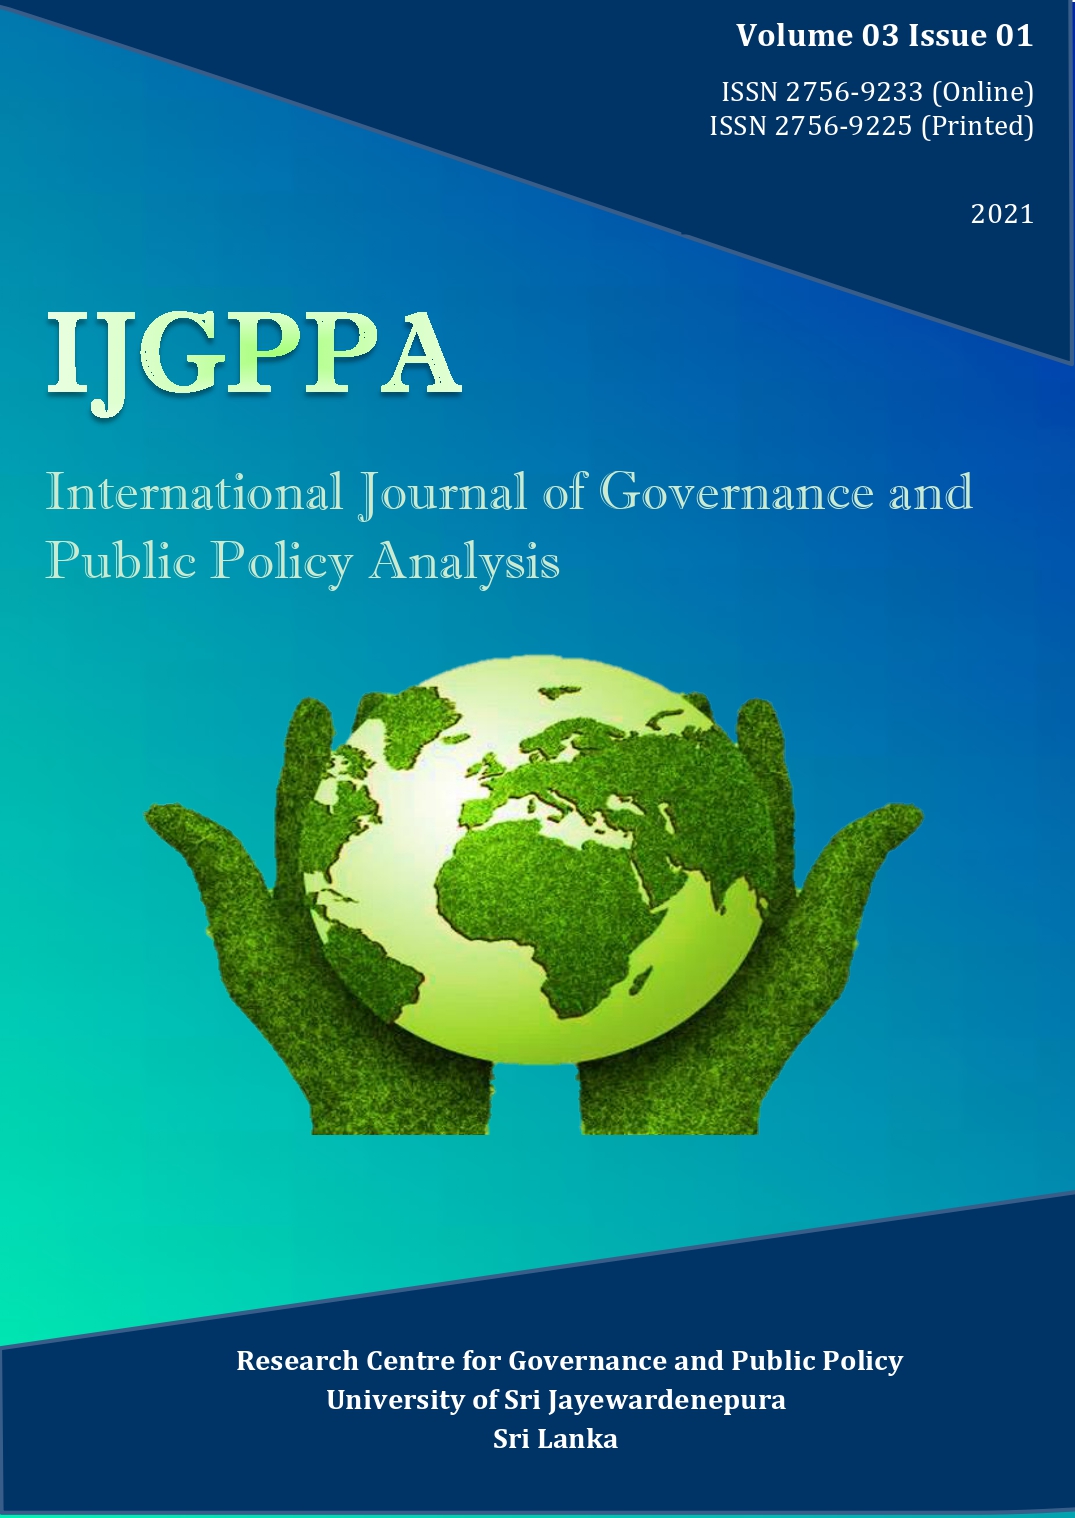 					View Vol. 3 No. 01 (2021): International Journal of Governance and Public Policy Analysis - (IJGPPA) - 2021
				